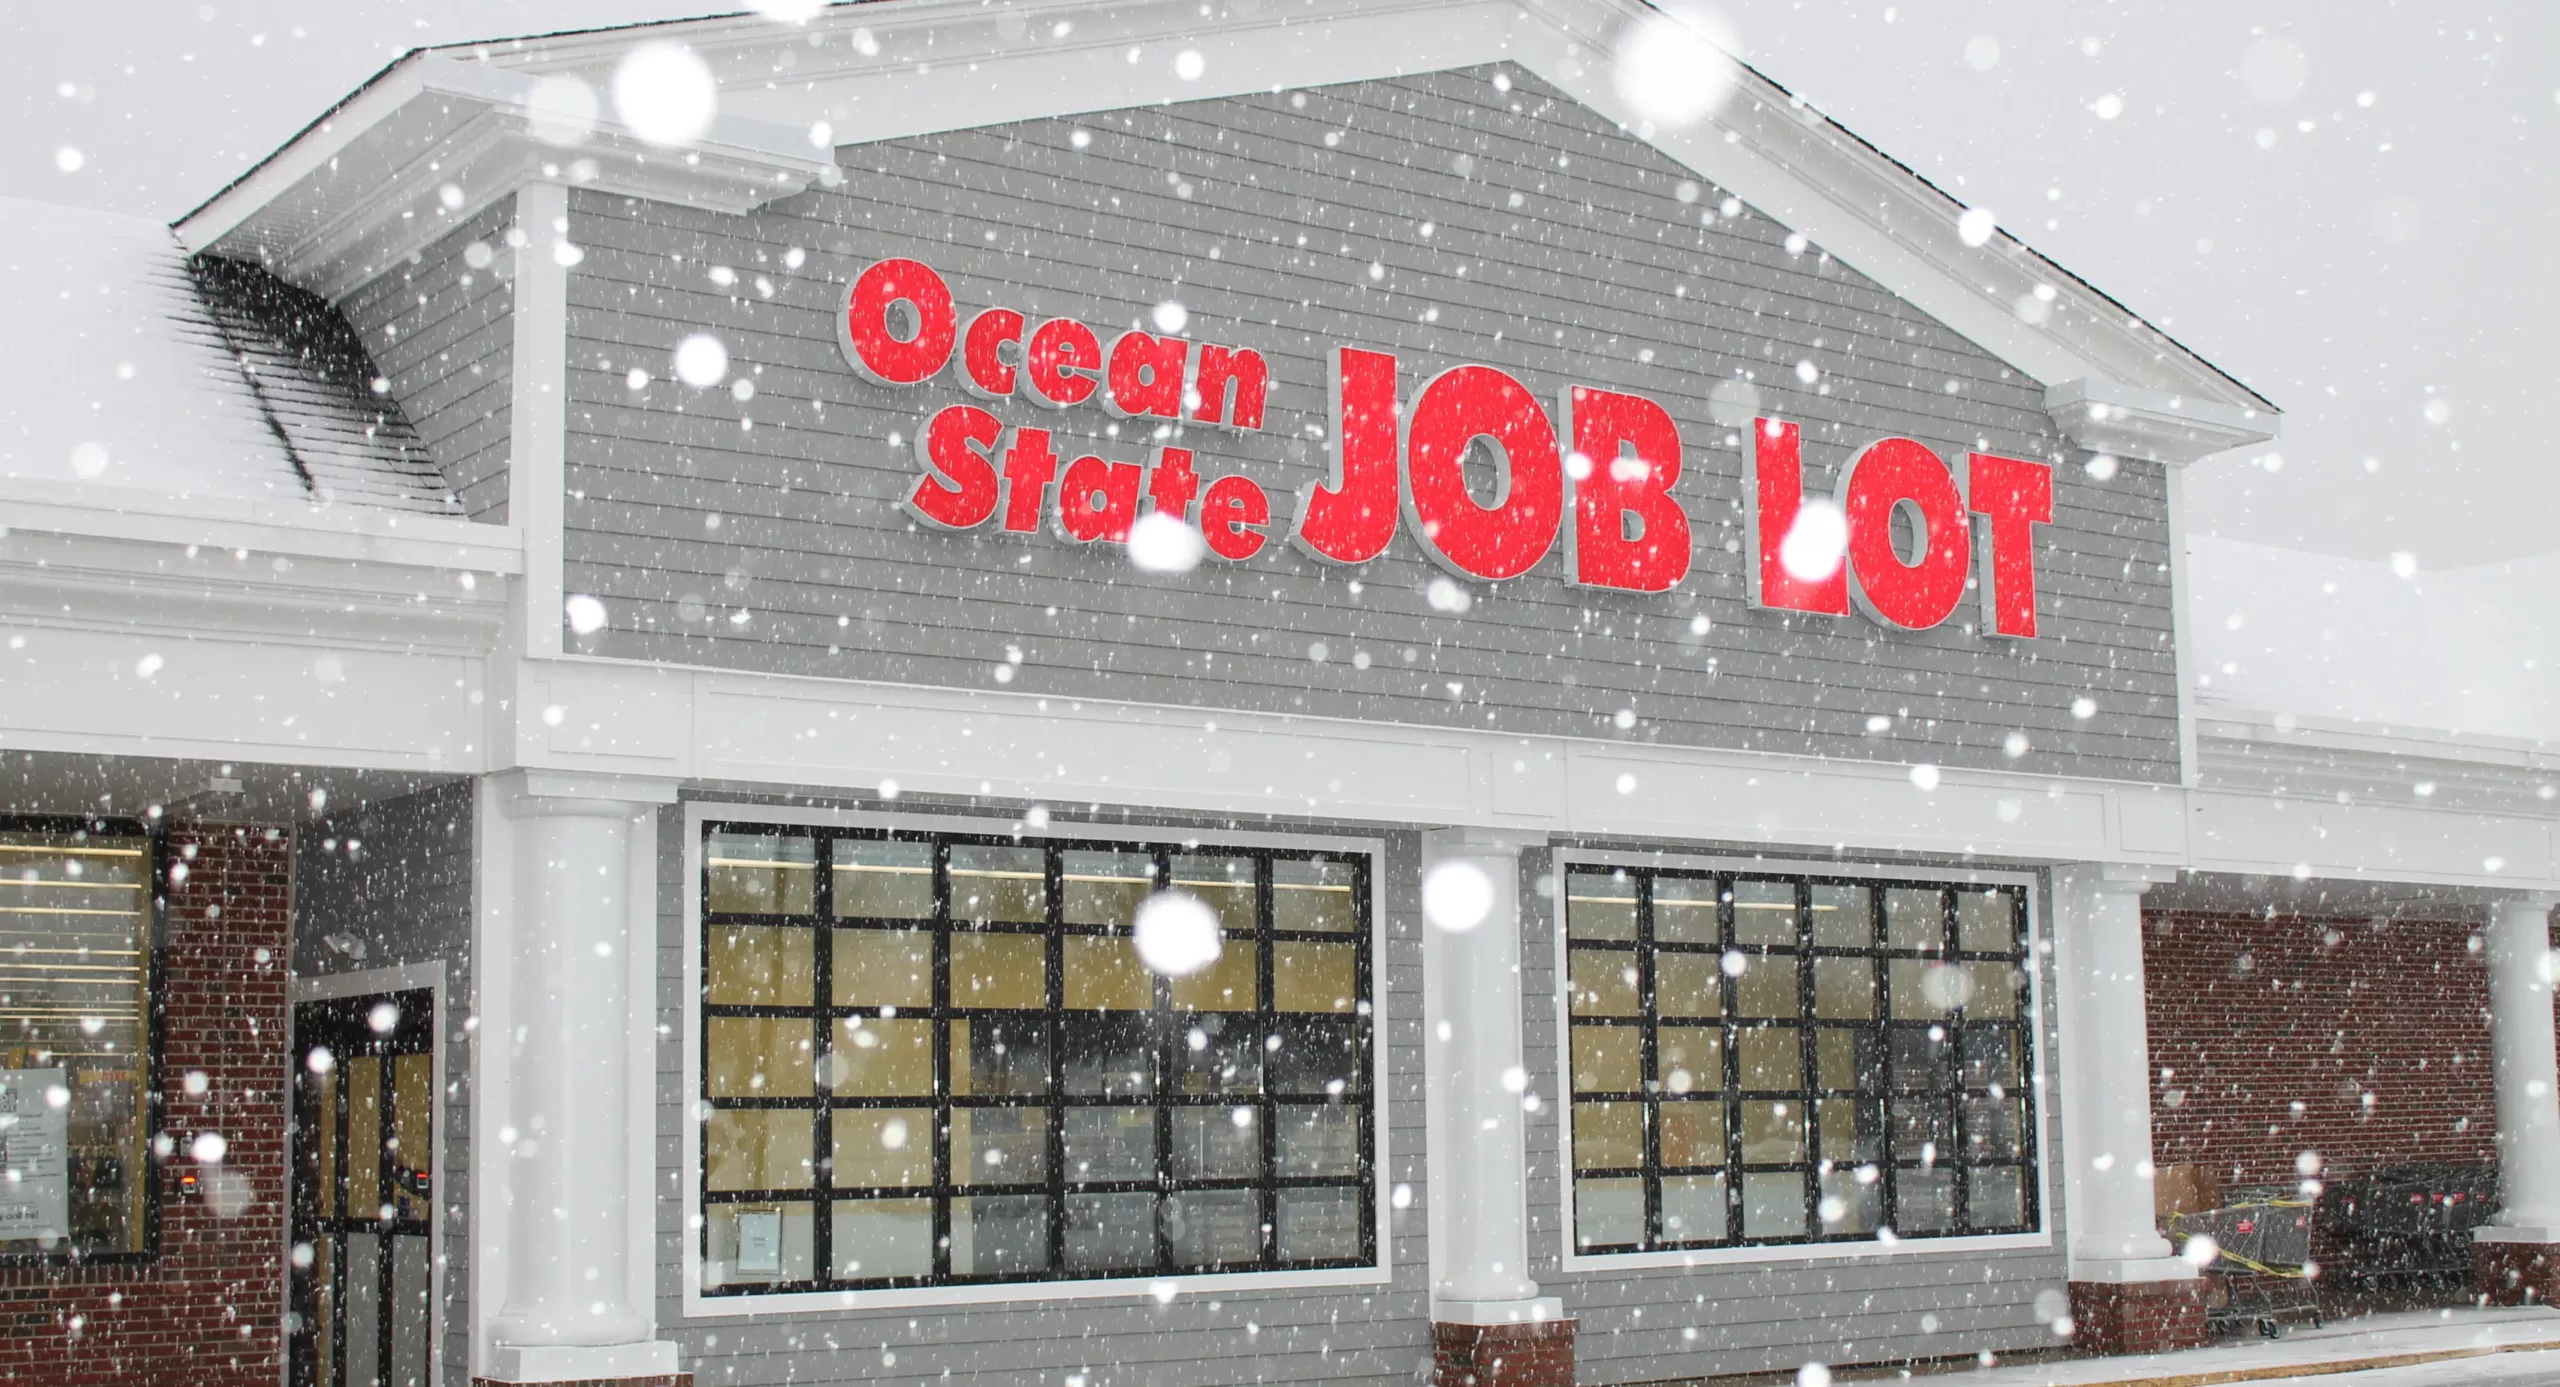 Snowy Ocean State Job Lot Storefront